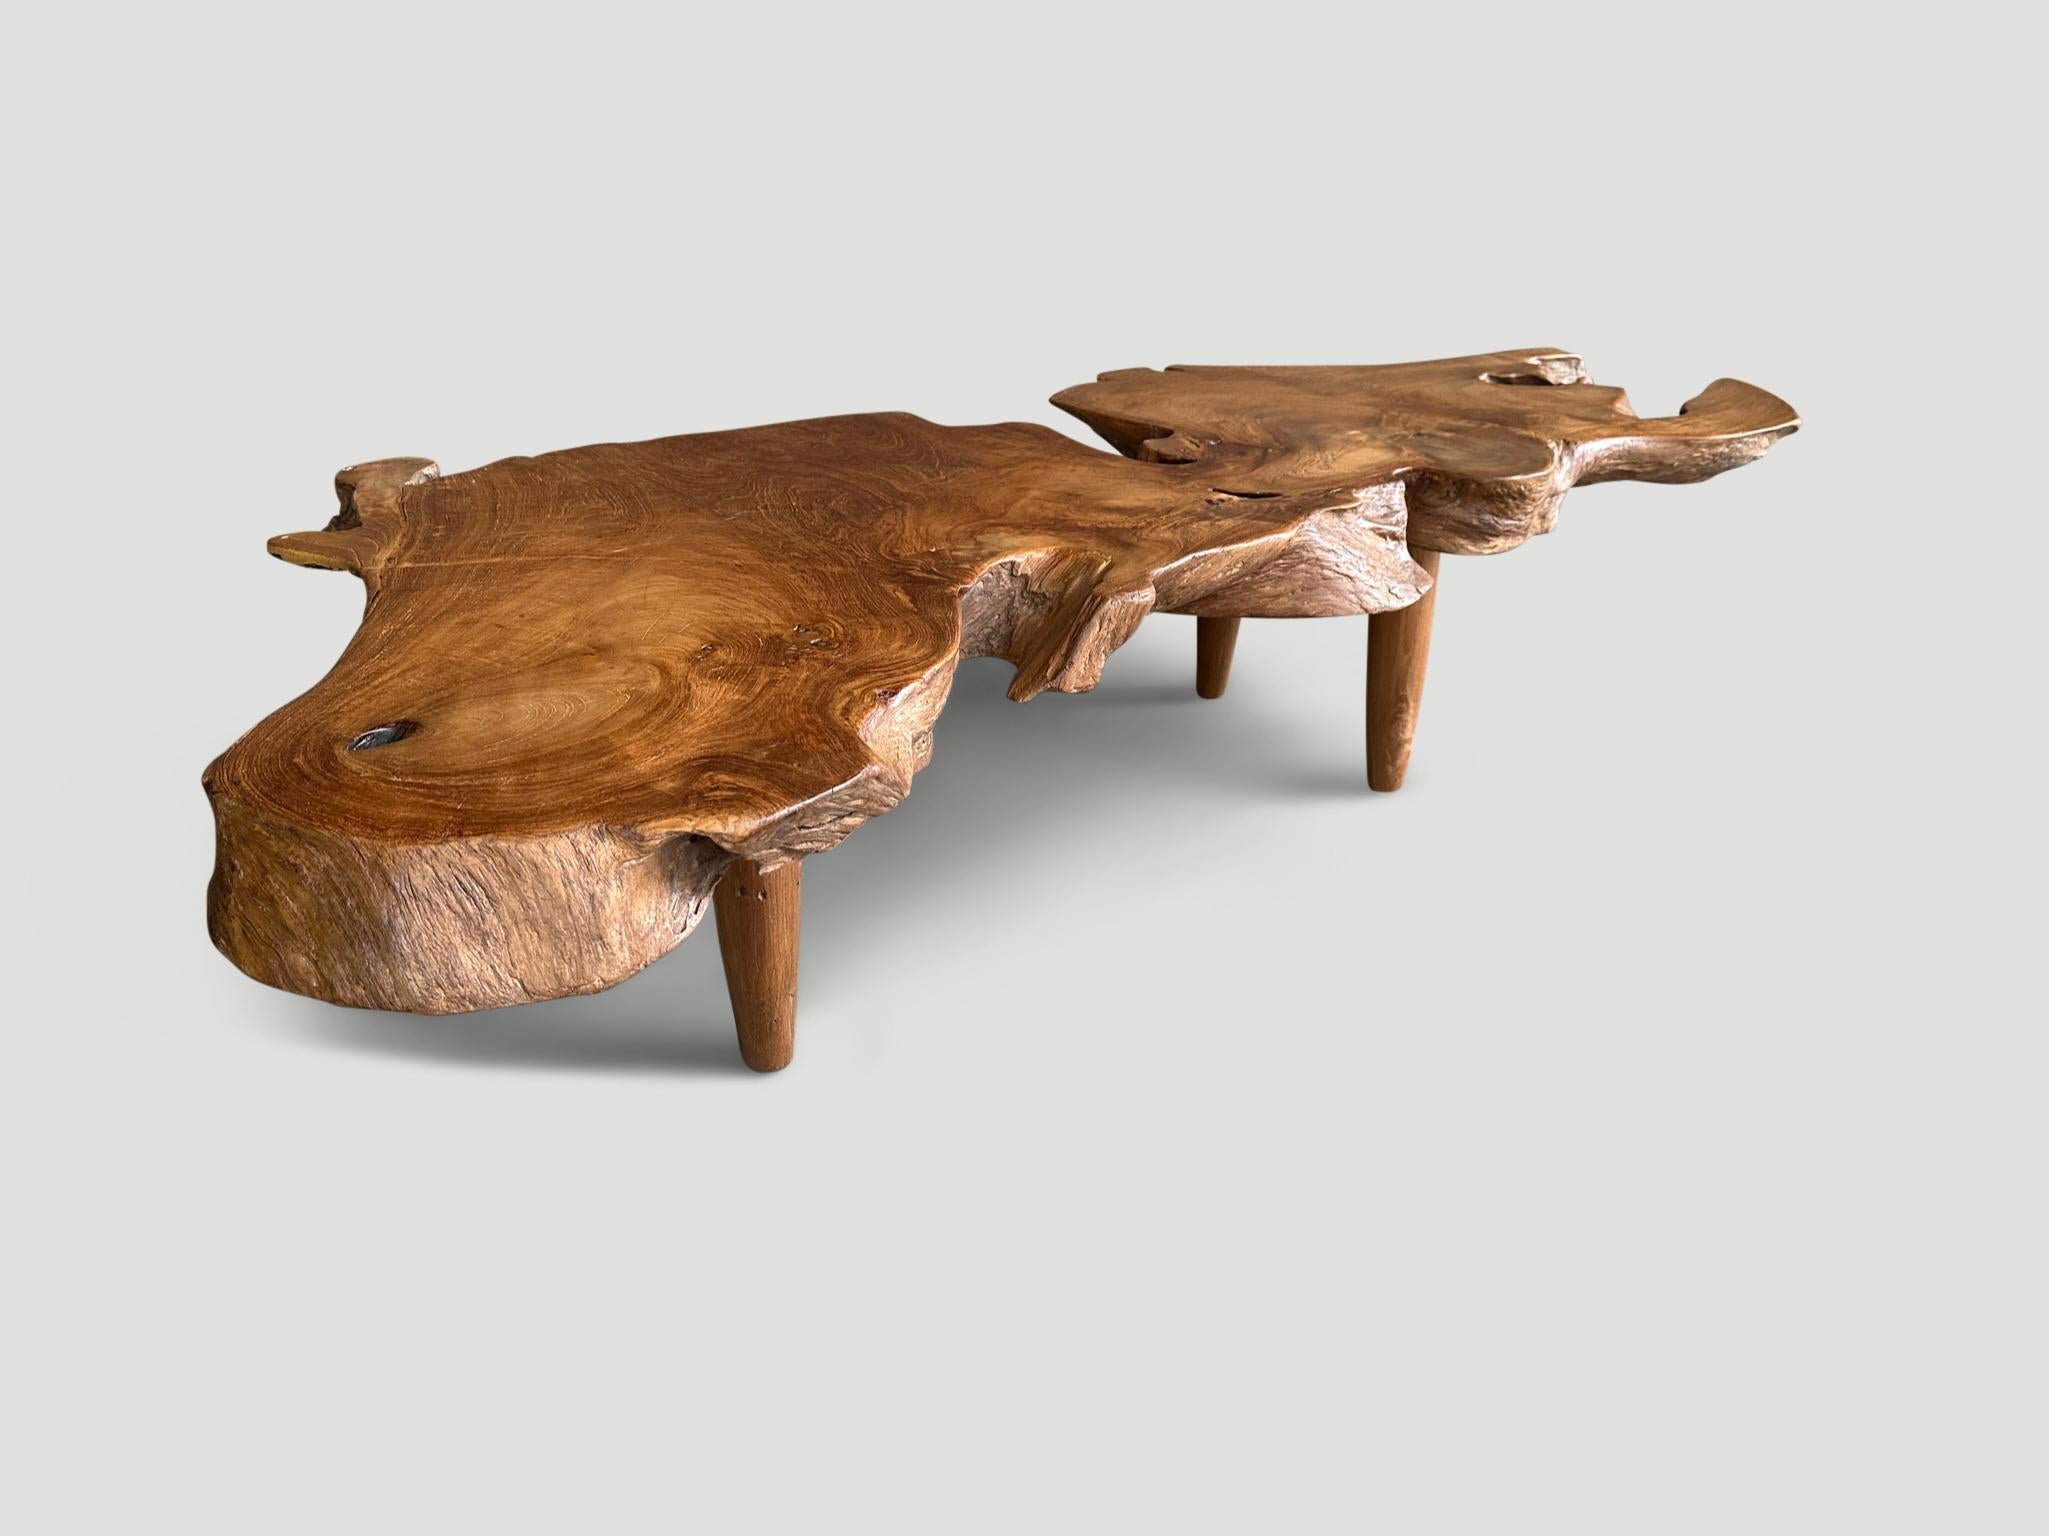 An impressive three inch thick single slab coffee table. Hand made from beautiful reclaimed teak wood, this stunning piece floats on mid-century style conical legs. Organic with a twist. Finished with a natural oil revealing the beautiful wood